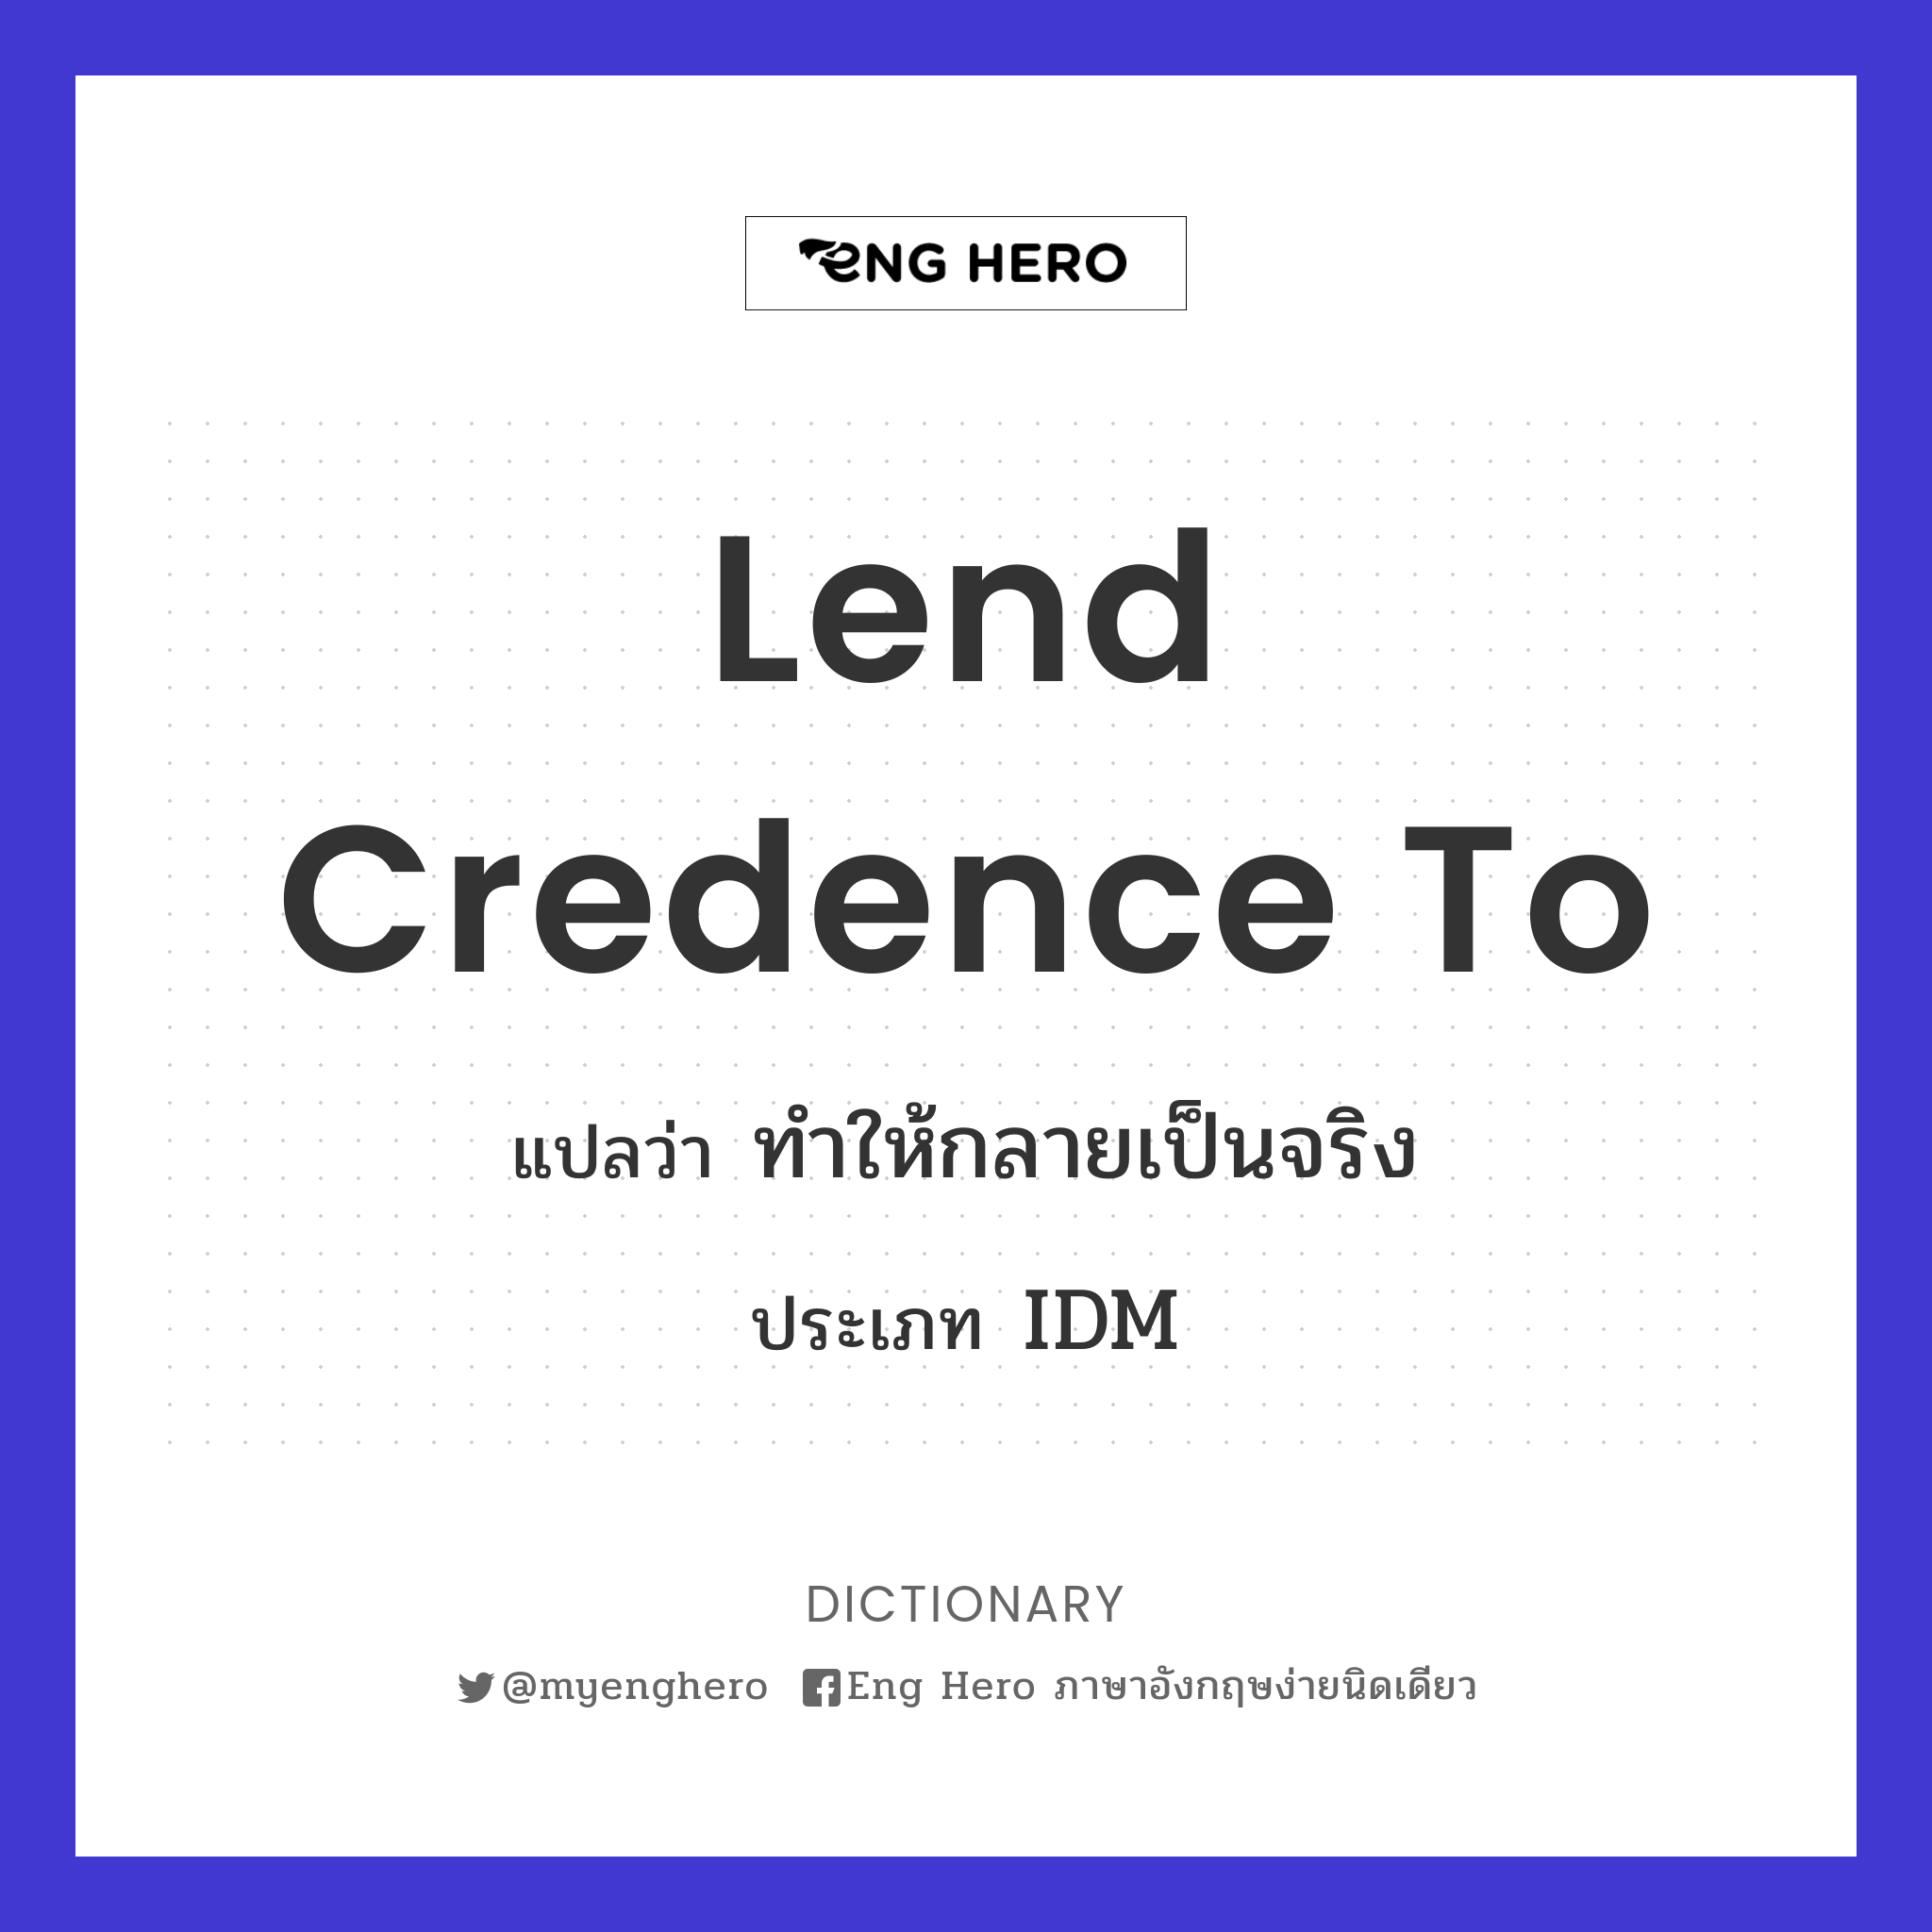 lend credence to